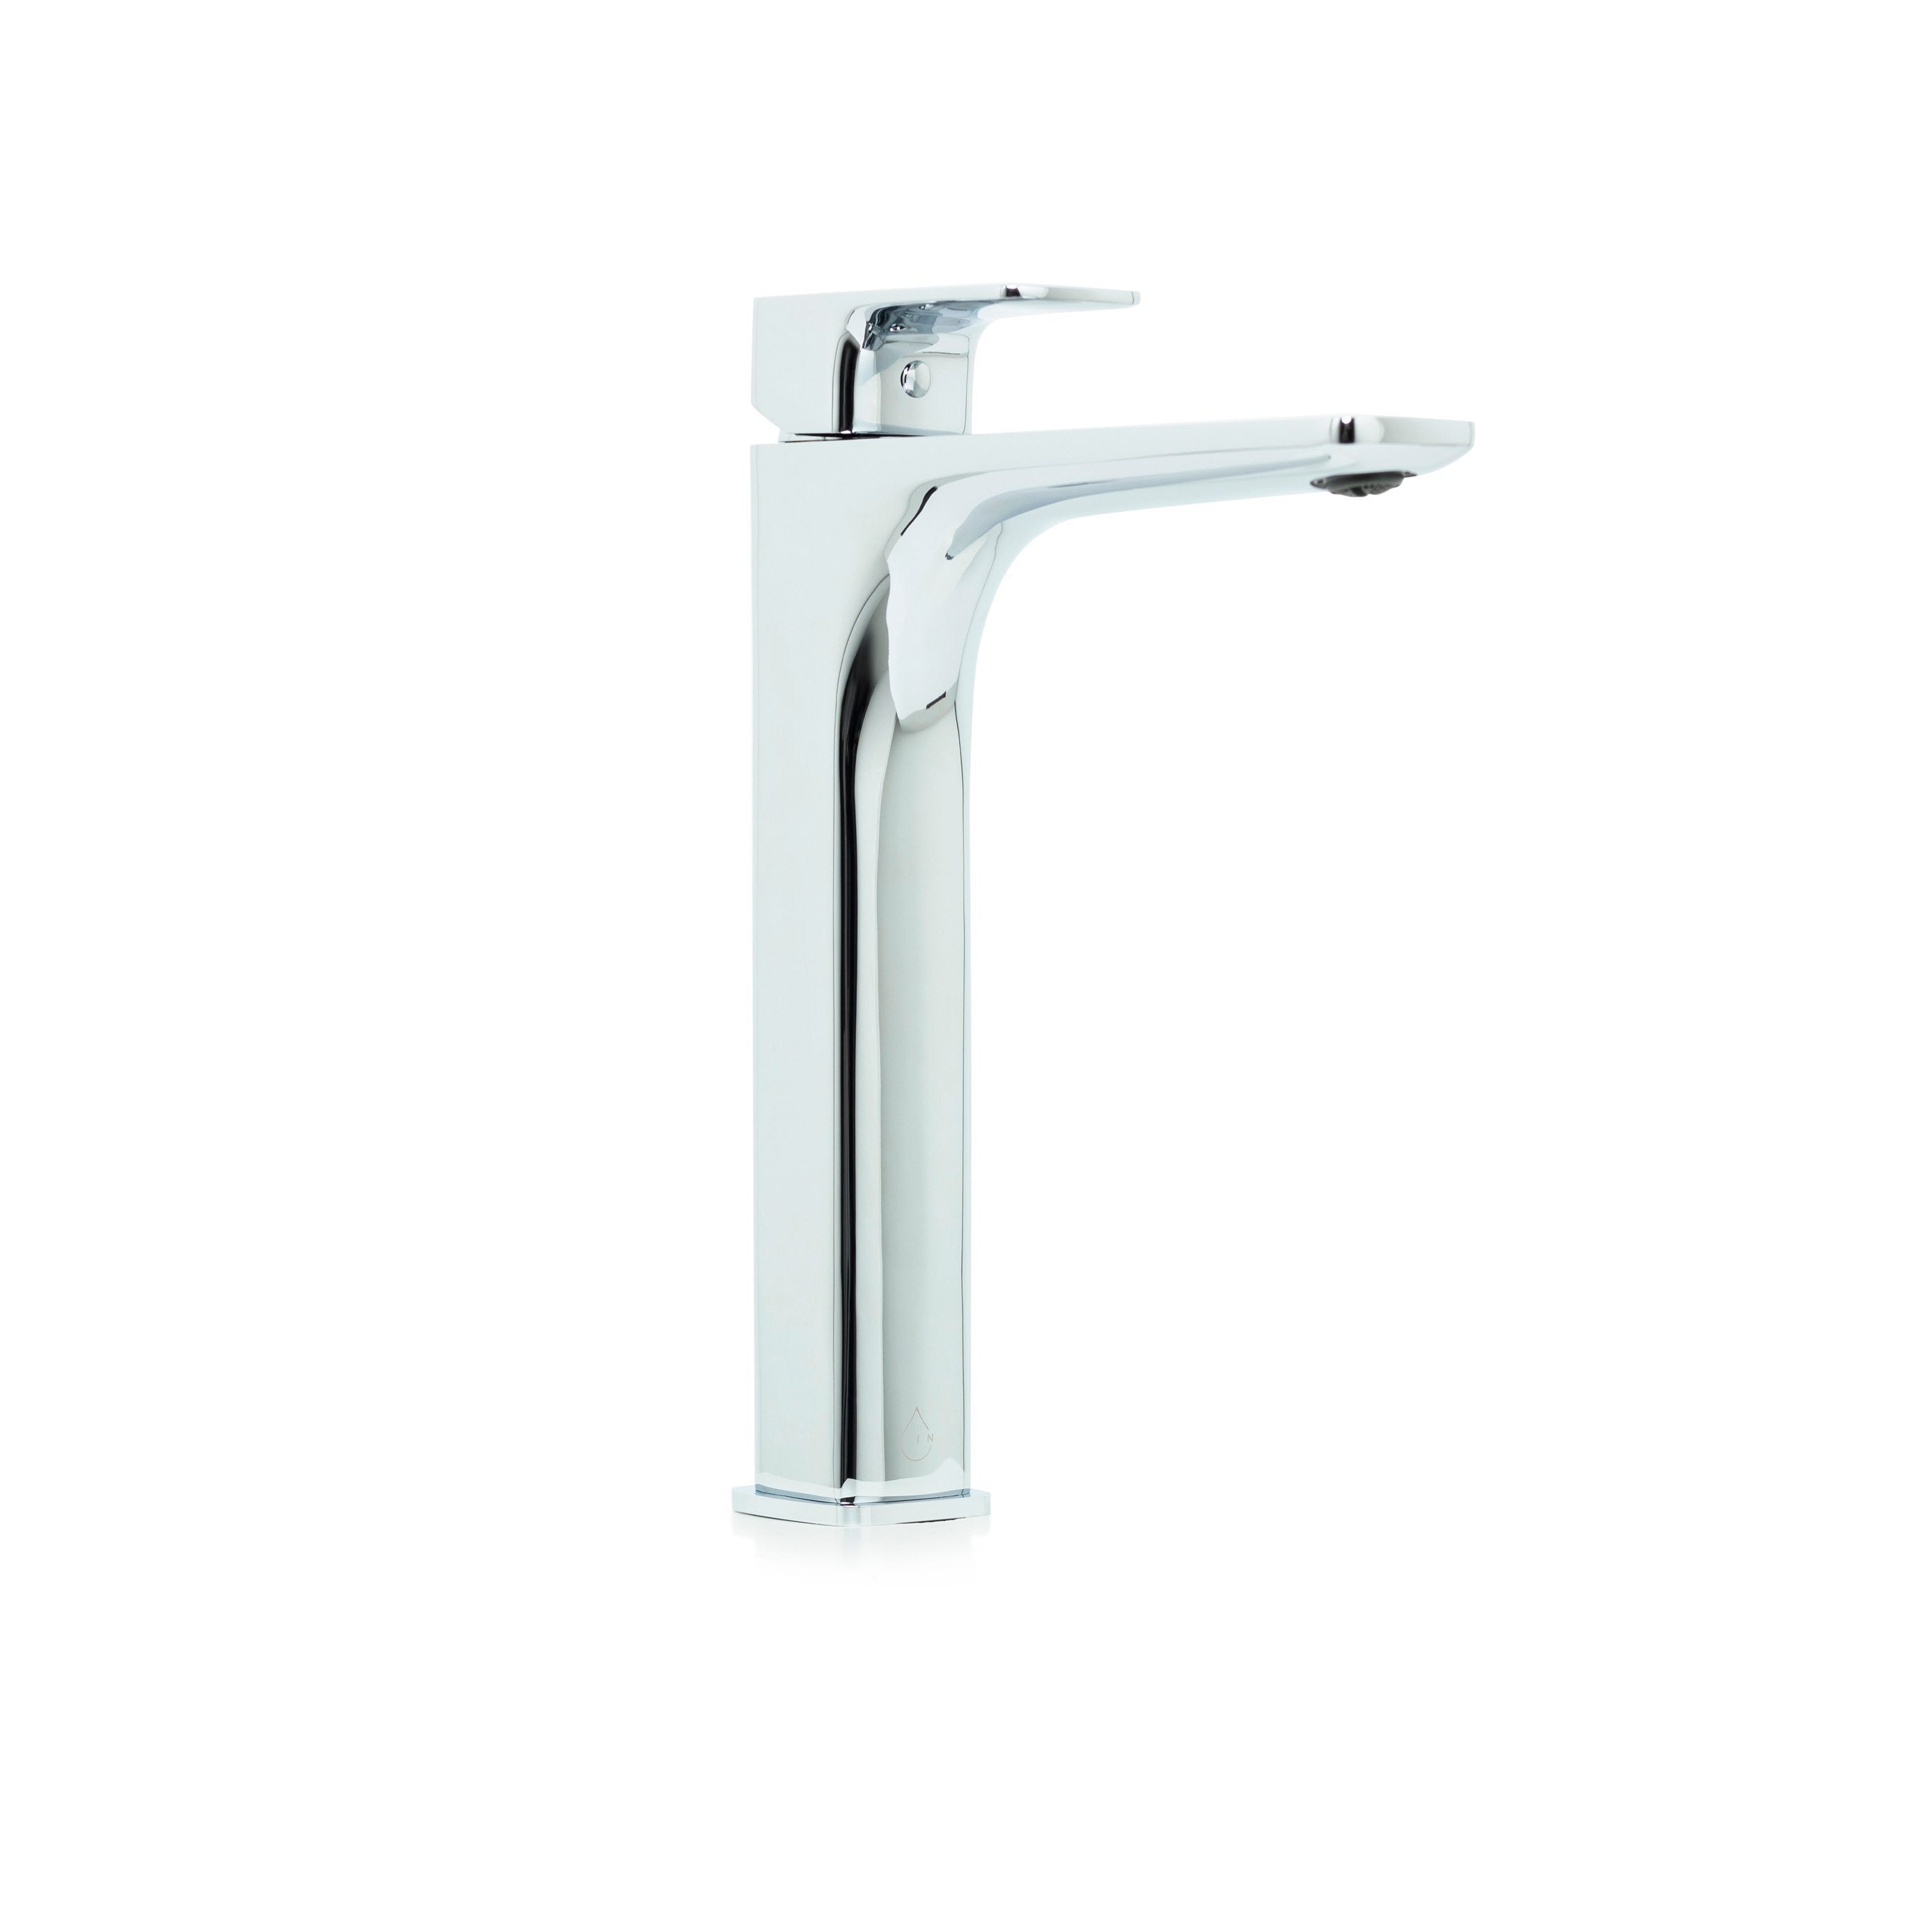 Balmoral Extended Basin Mixer in Chrome